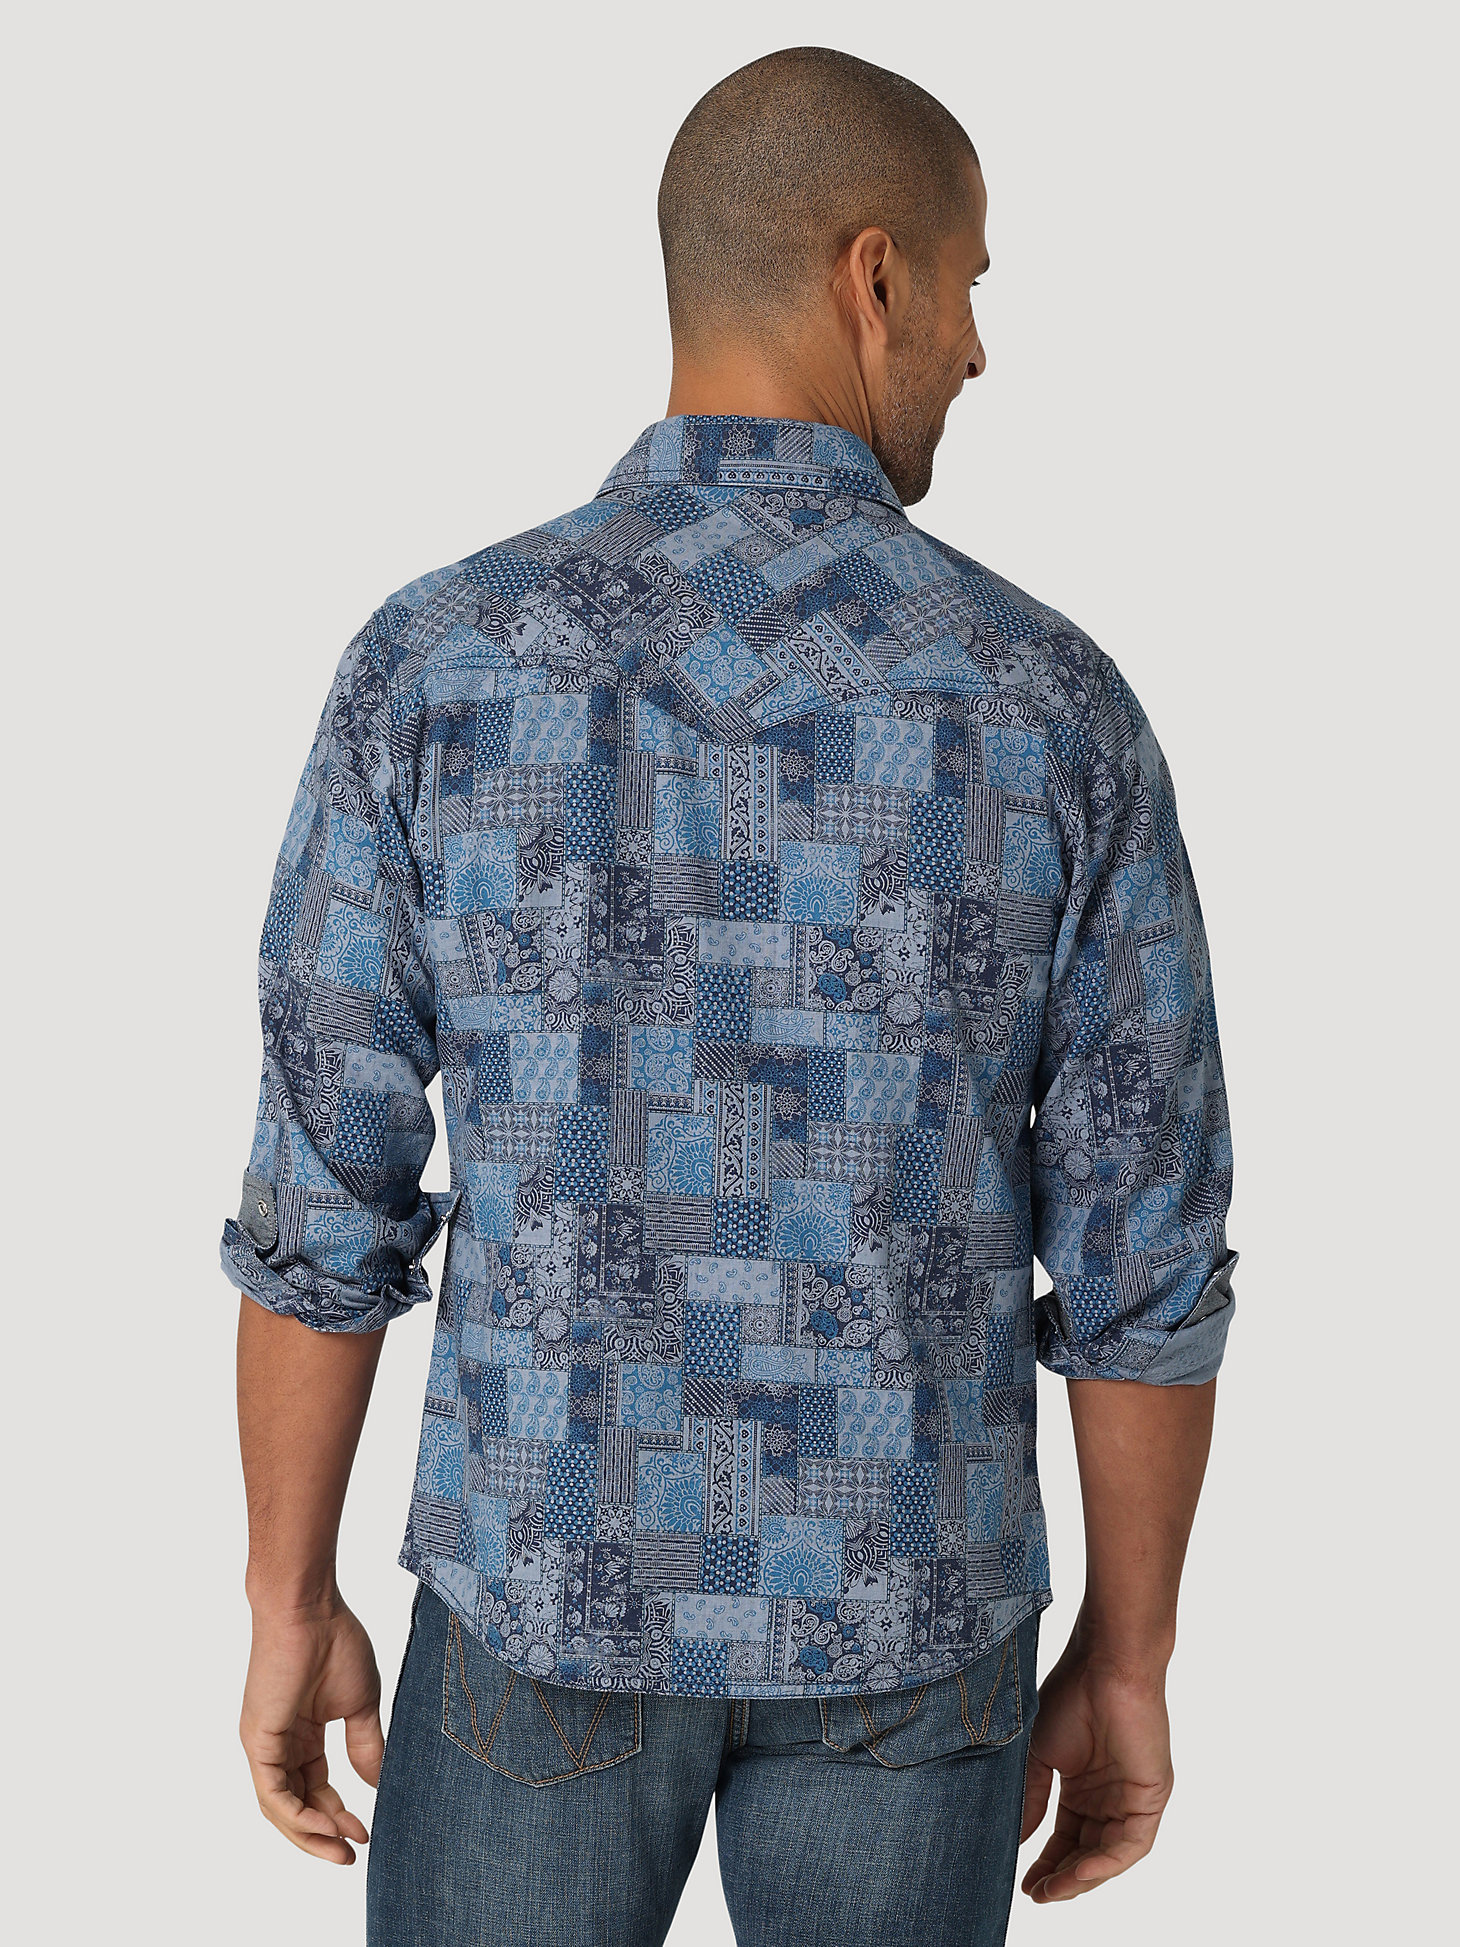 Wrangler Retro® Premium Patchwork Western Snap Shirt in Blue Patches alternative view 1